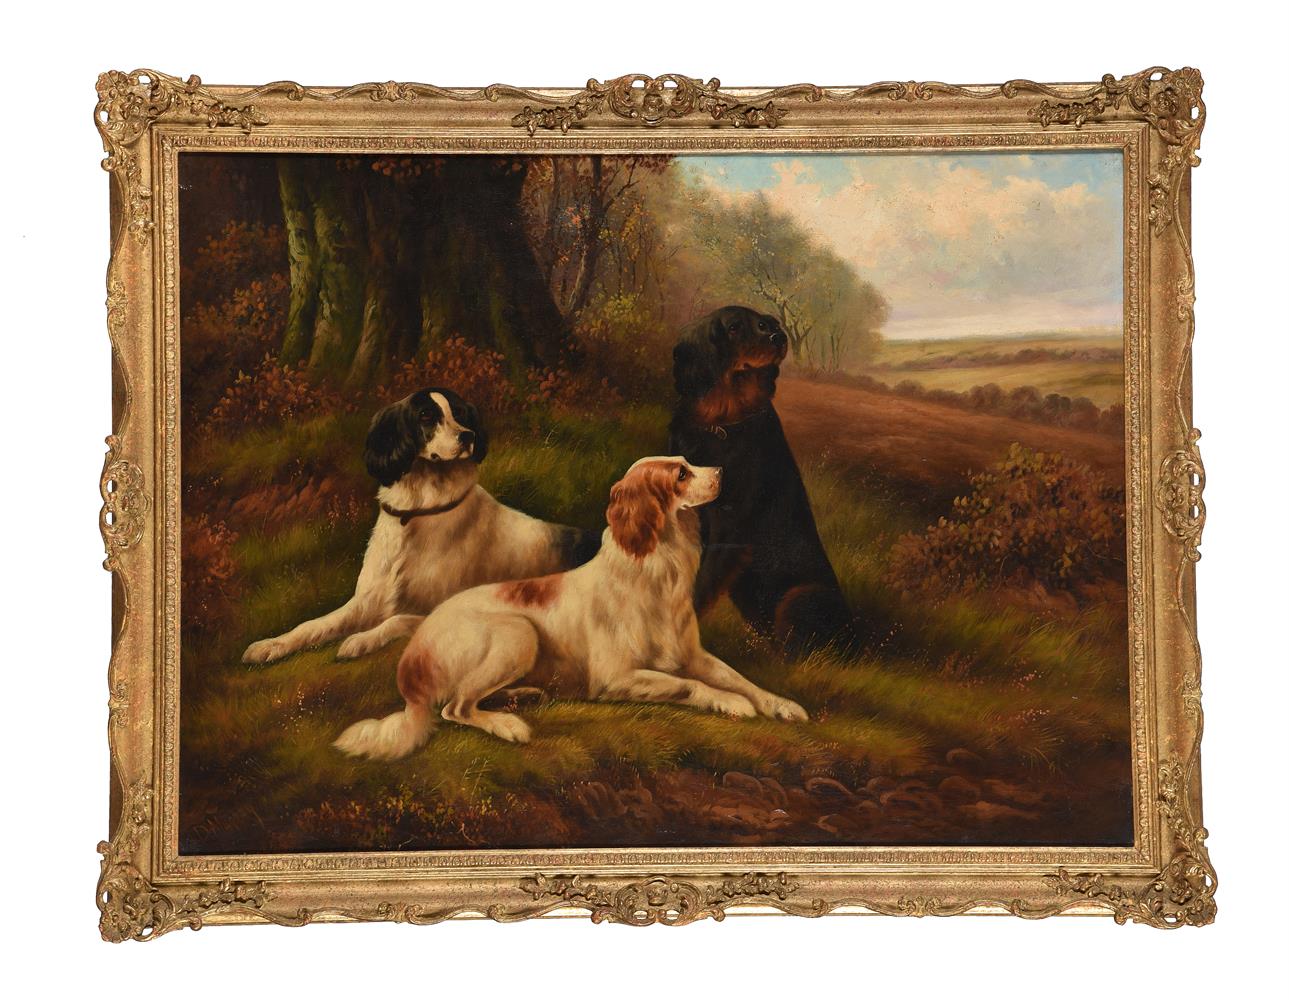 D. MURRAY (SCOTTISH 19TH/20TH CENTURY), THREE GORDON SETTERS, SEATED IN A COUNTRY LANDSCAPE - Image 2 of 3